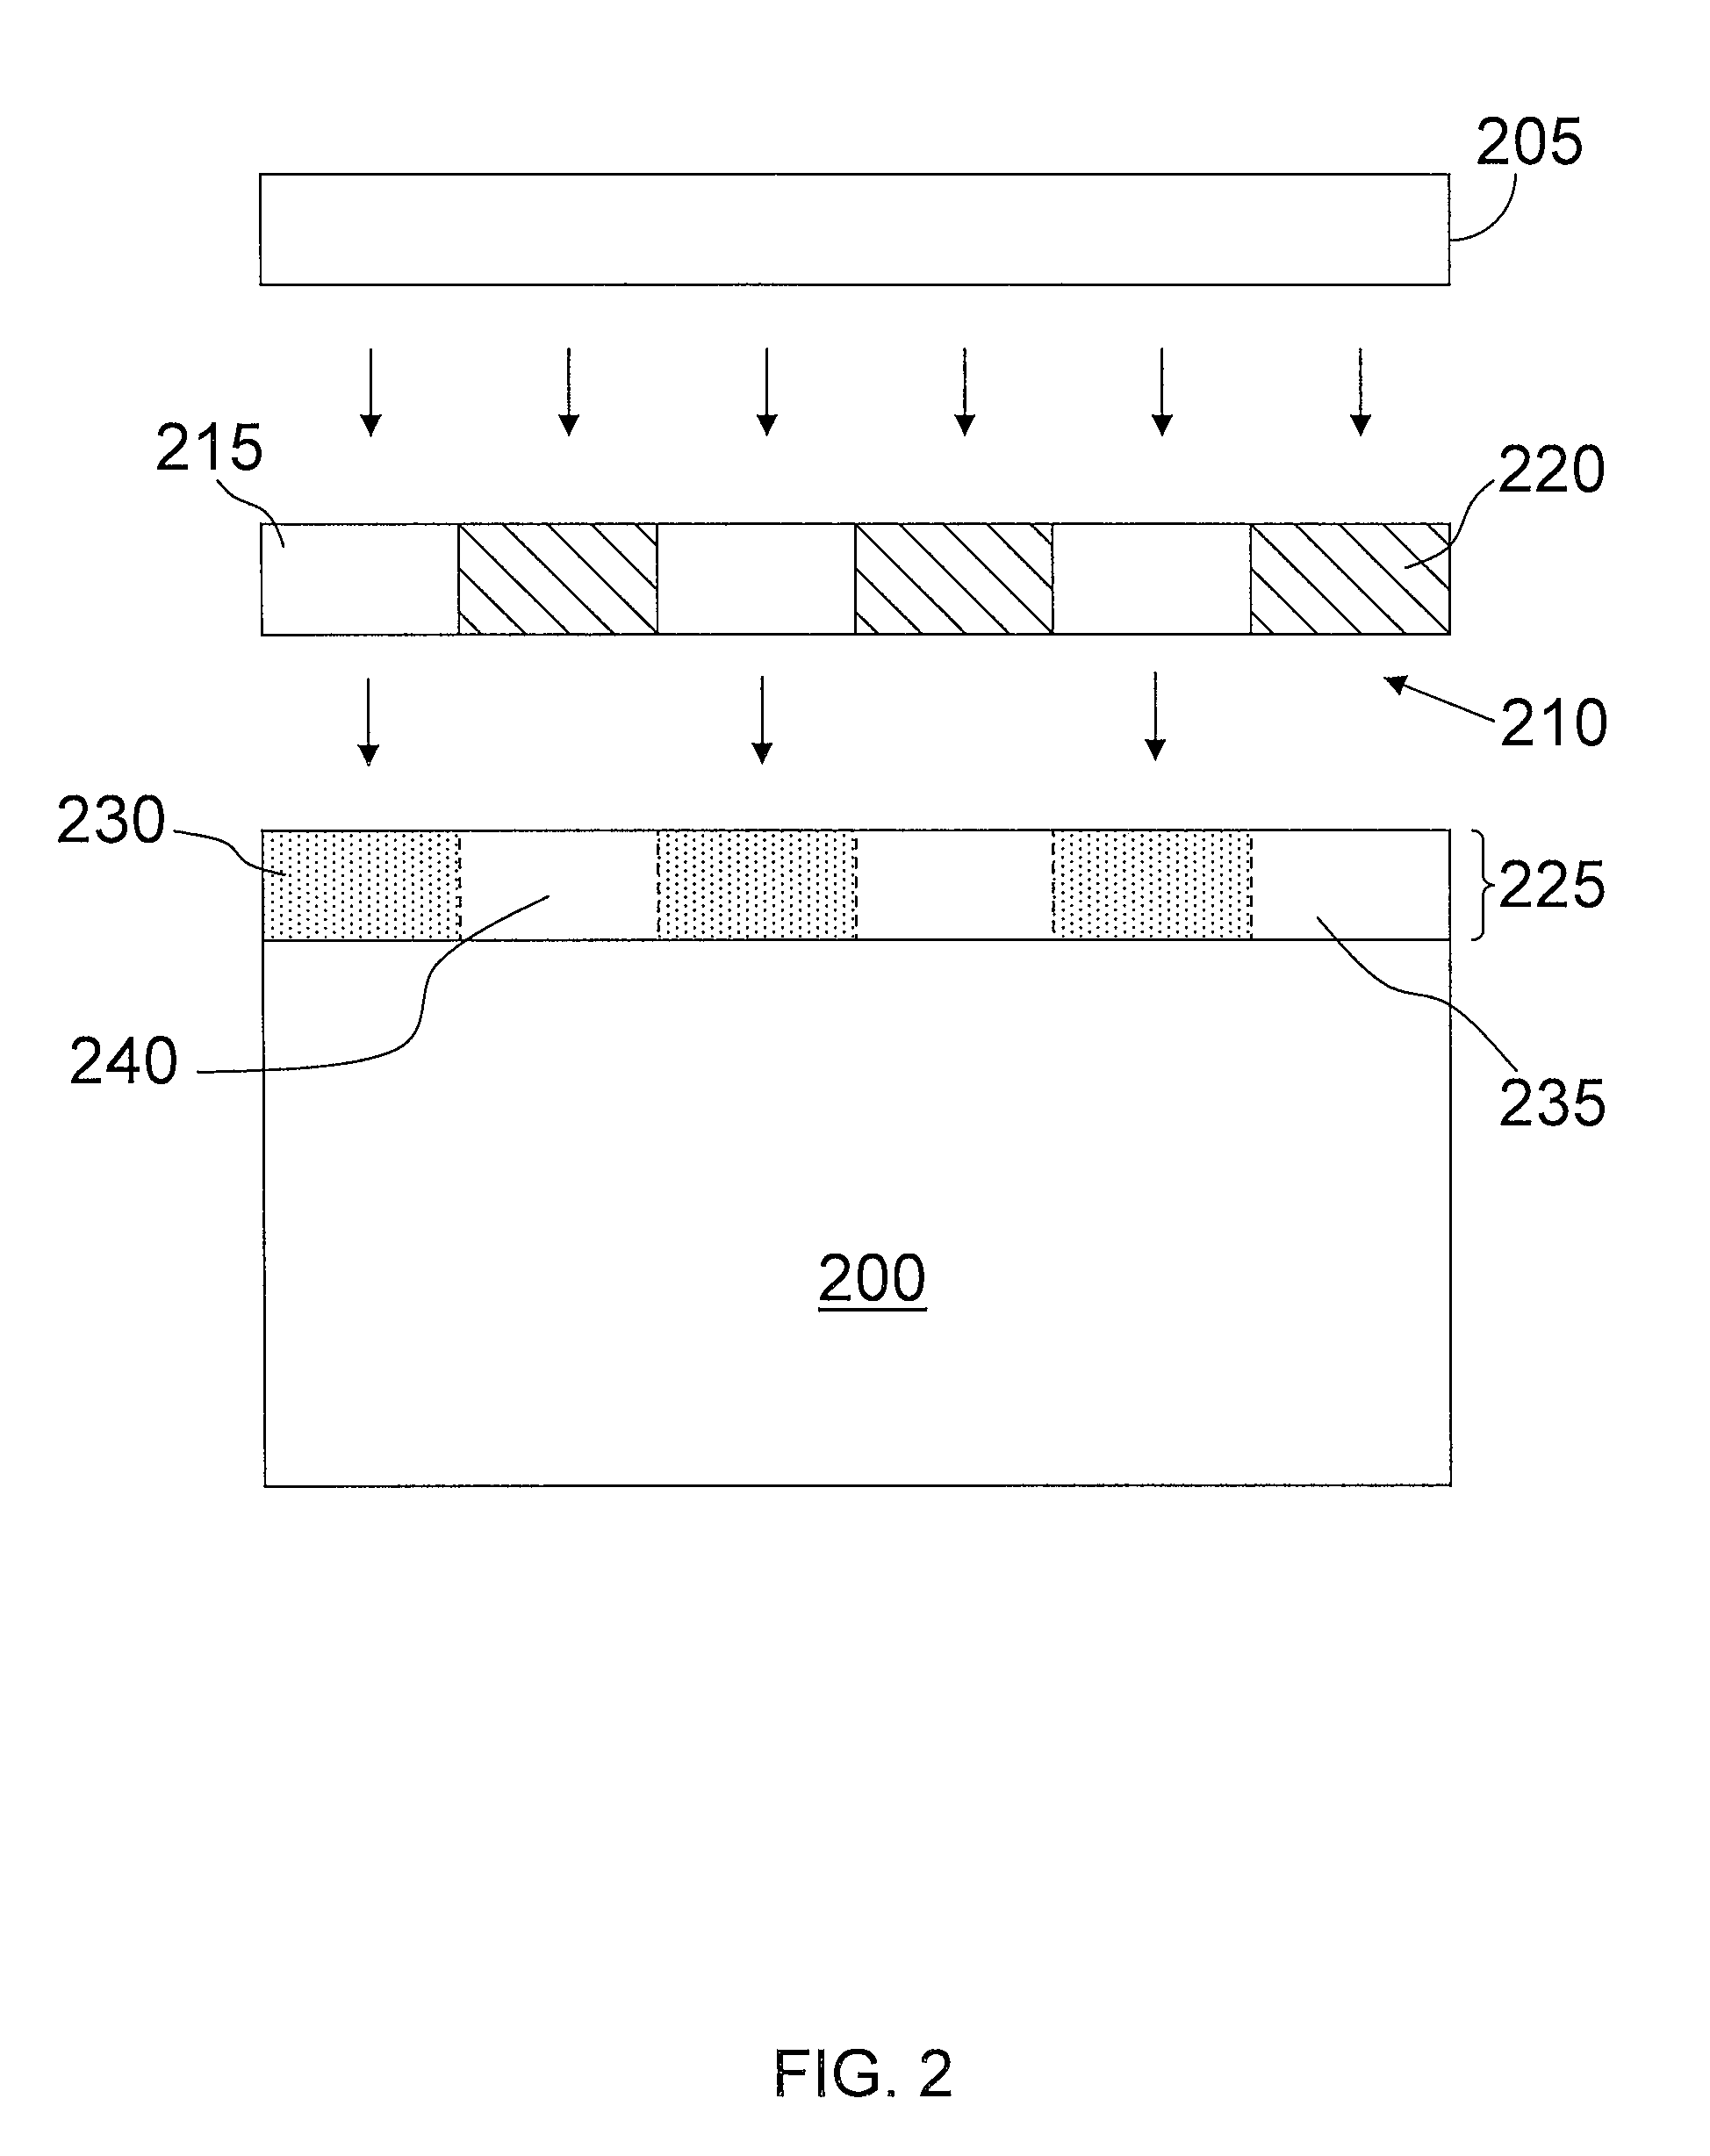 Method of use for photopatternable dielectric materials for beol applications